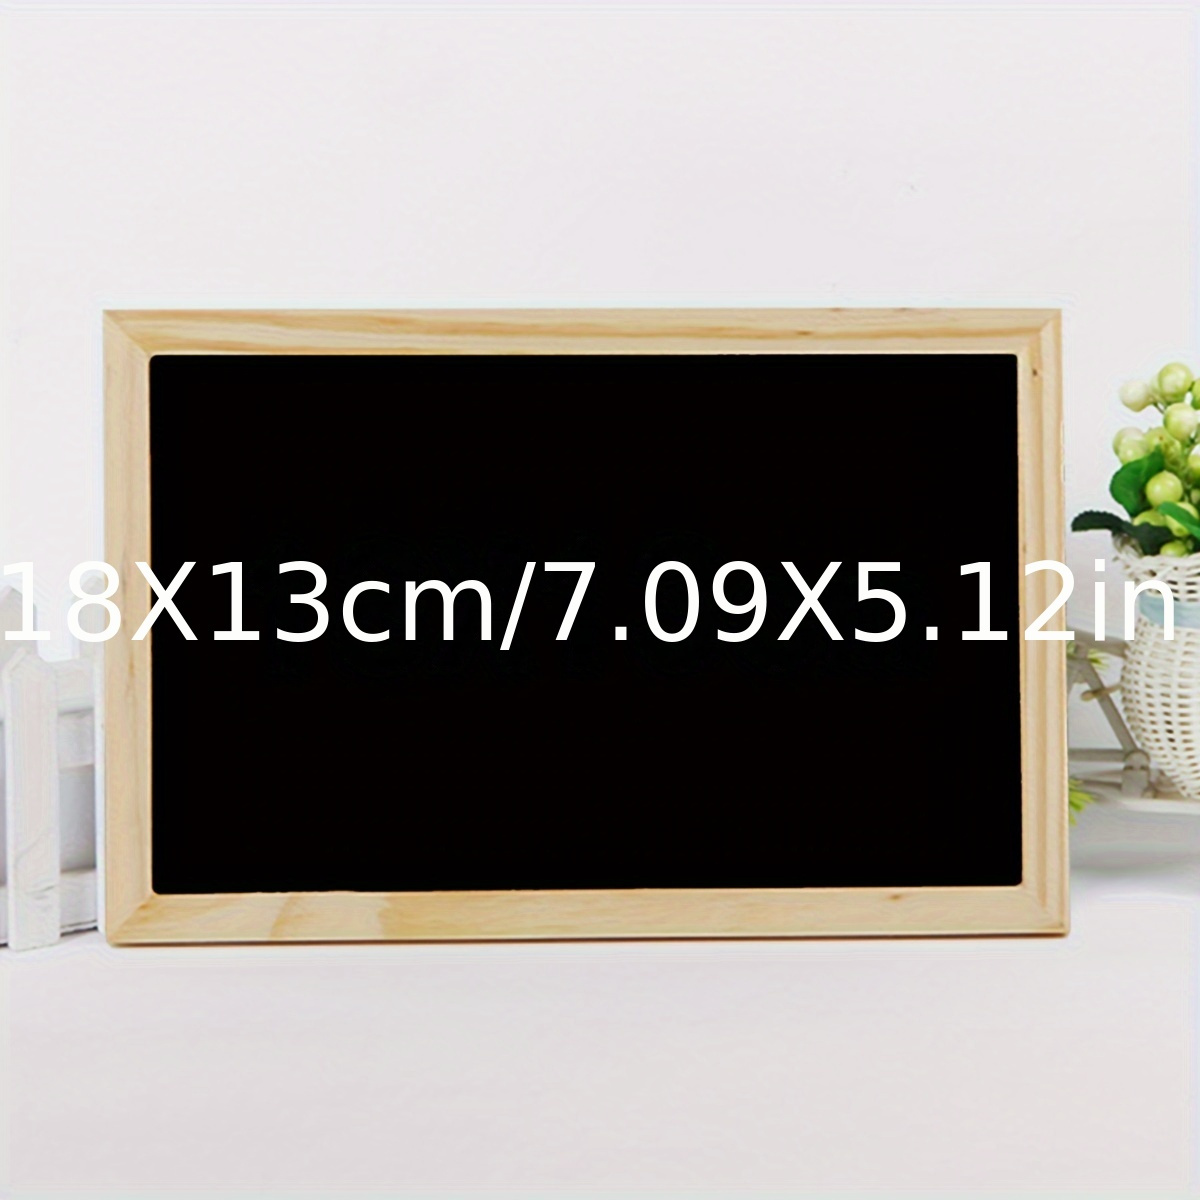 

Creative Double-sided Blackboard Wooden Crafts Wooden Frame Small Blackboard Writing Message Board Home Decoration Diy Signpost